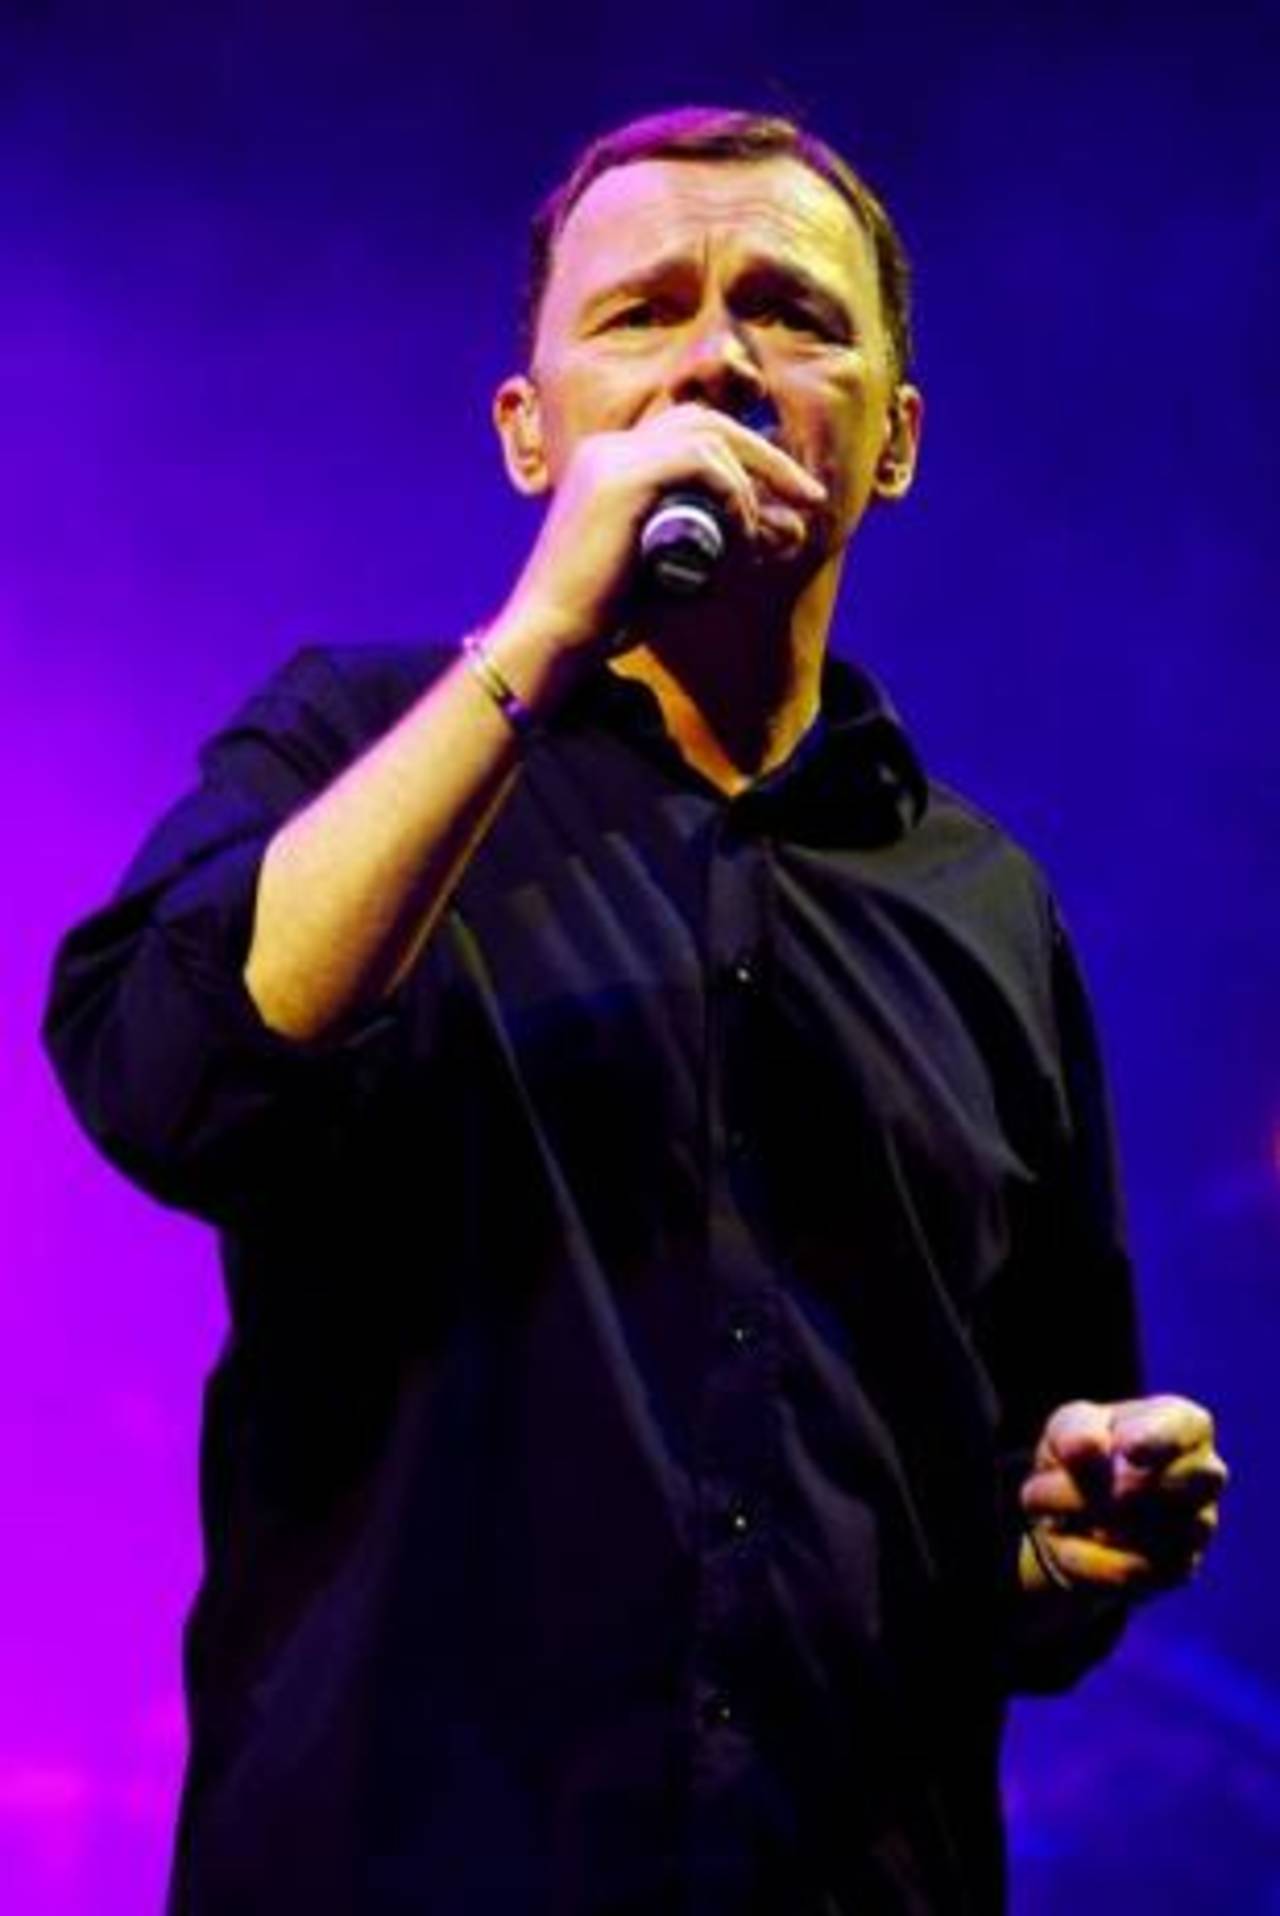 Ali Campbell of UB40 is so troubled by being perennially mistaken for Danny Morrison, he fails to correctly read the lyrics off the teleprompter at a concert&nbsp;&nbsp;&bull;&nbsp;&nbsp;Rob Loud/Getty Images